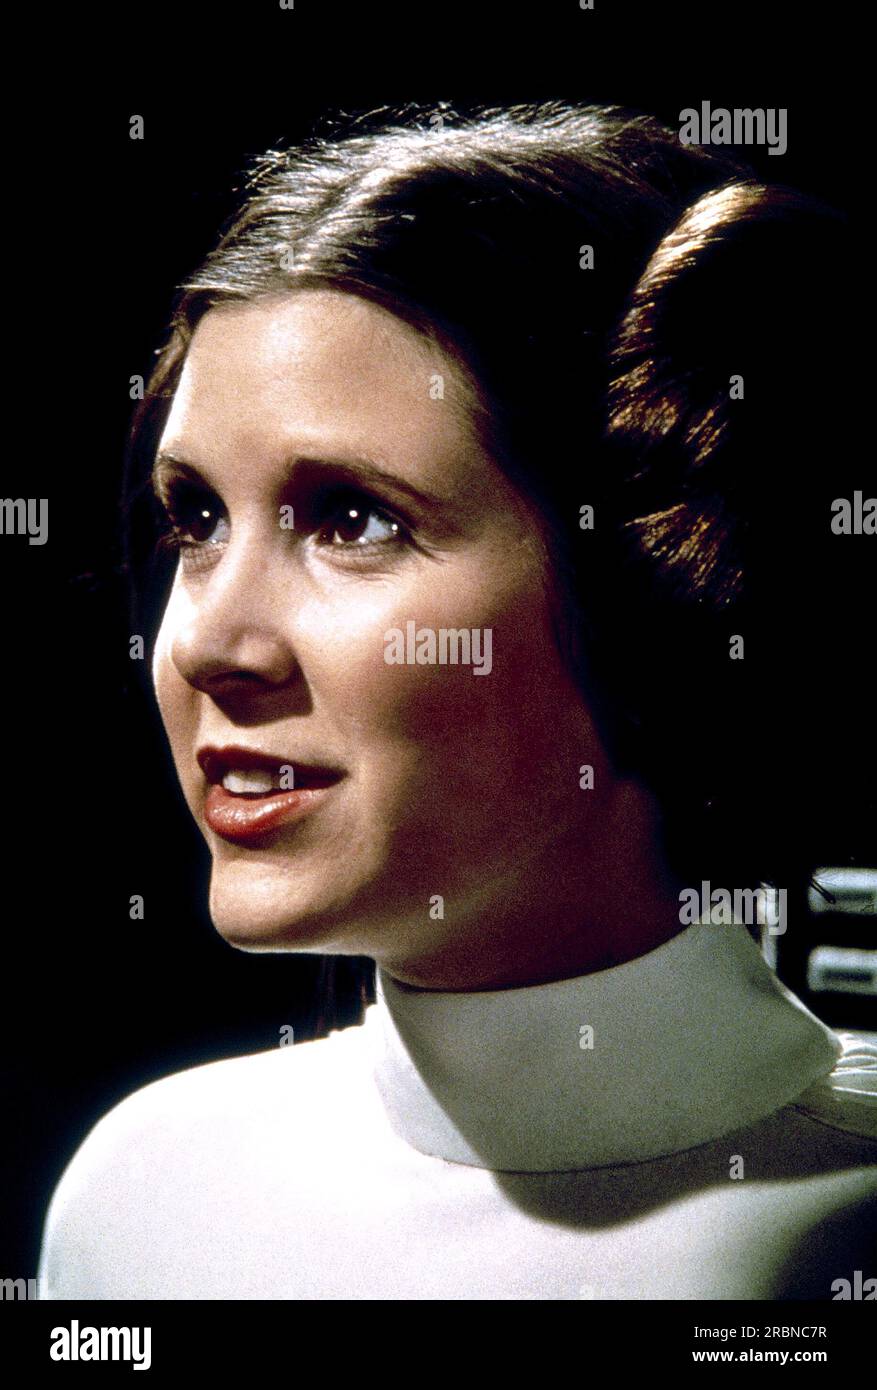 Star Wars  Star Wars Episode IV : A New Hope  Carrie Fisher  Princess Leia Stock Photo